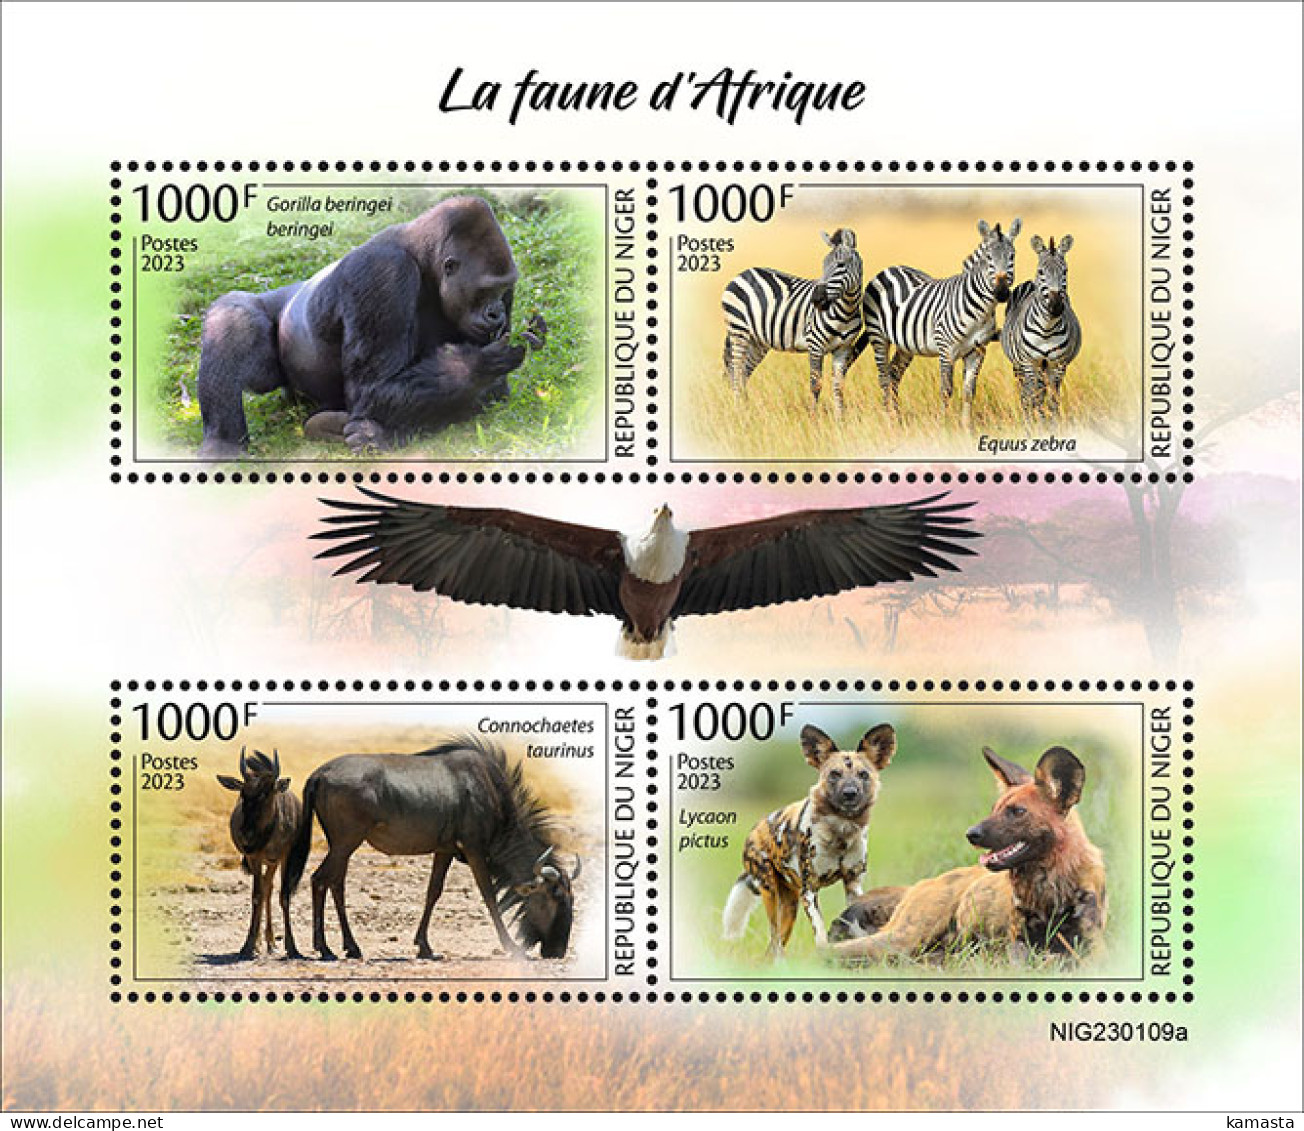 Niger  2023 Fauna Of Africa. Gorilla. (109a) OFFICIAL ISSUE - Gorilas